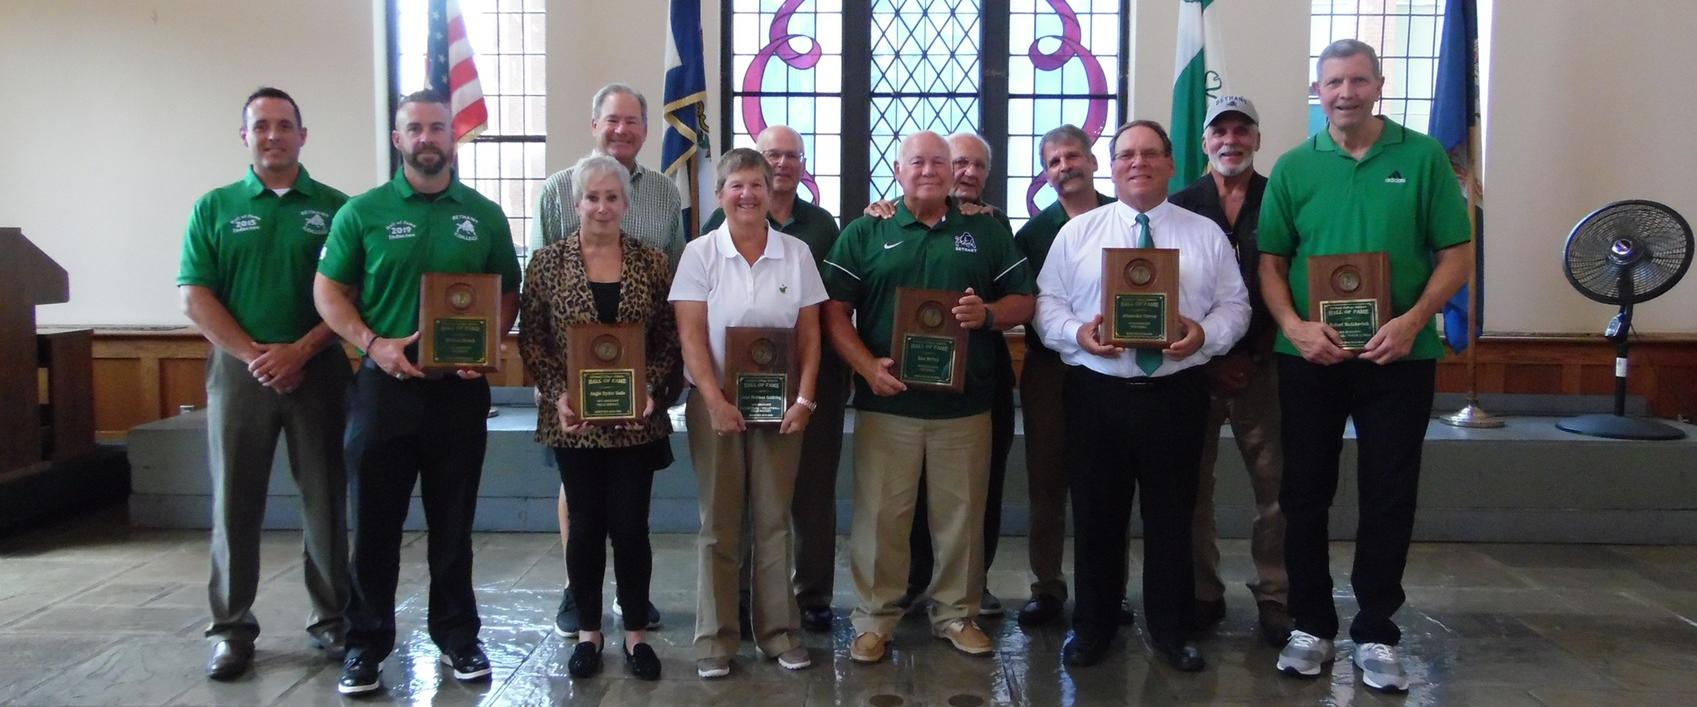 Bethany College Inducts Six New HoF Members During Annual Homecoming Tradition